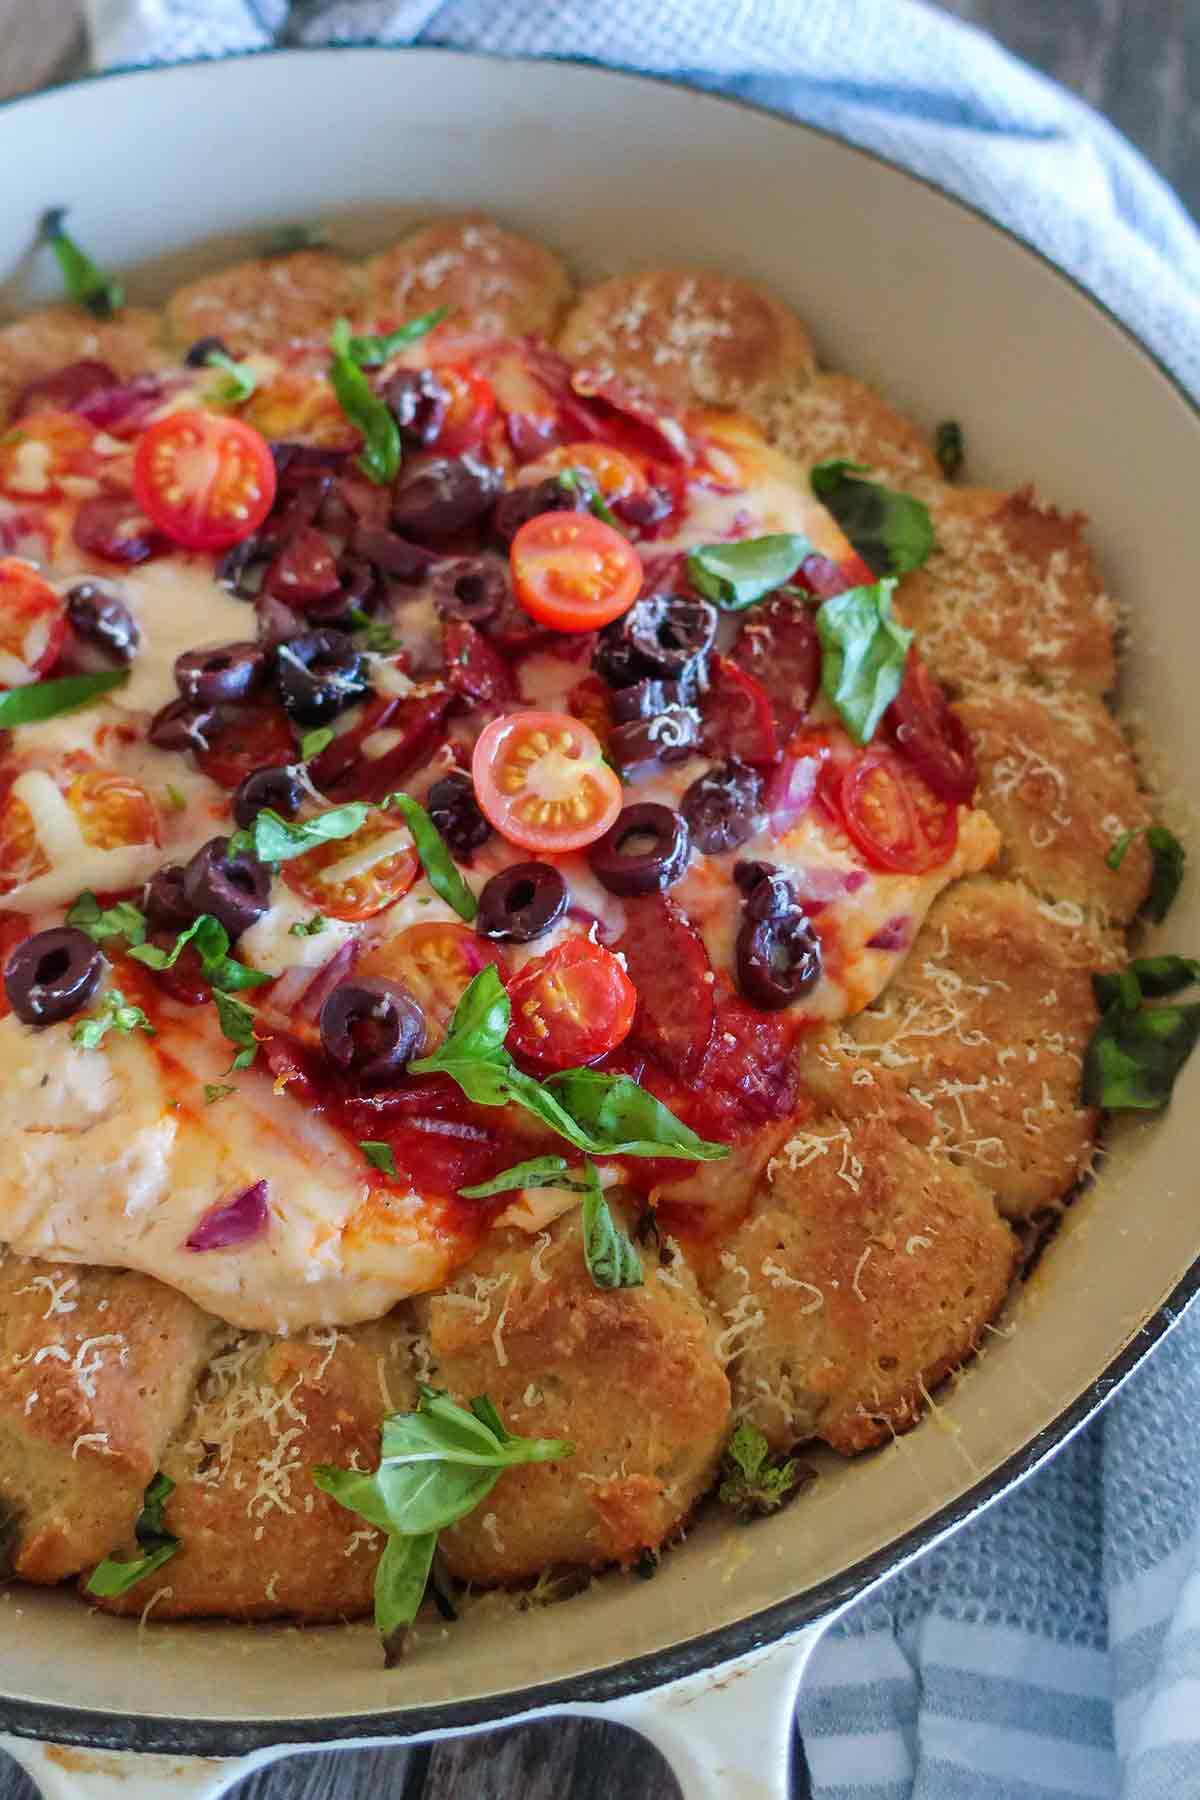 baked pizza dip with toppings and rolls in a skillet